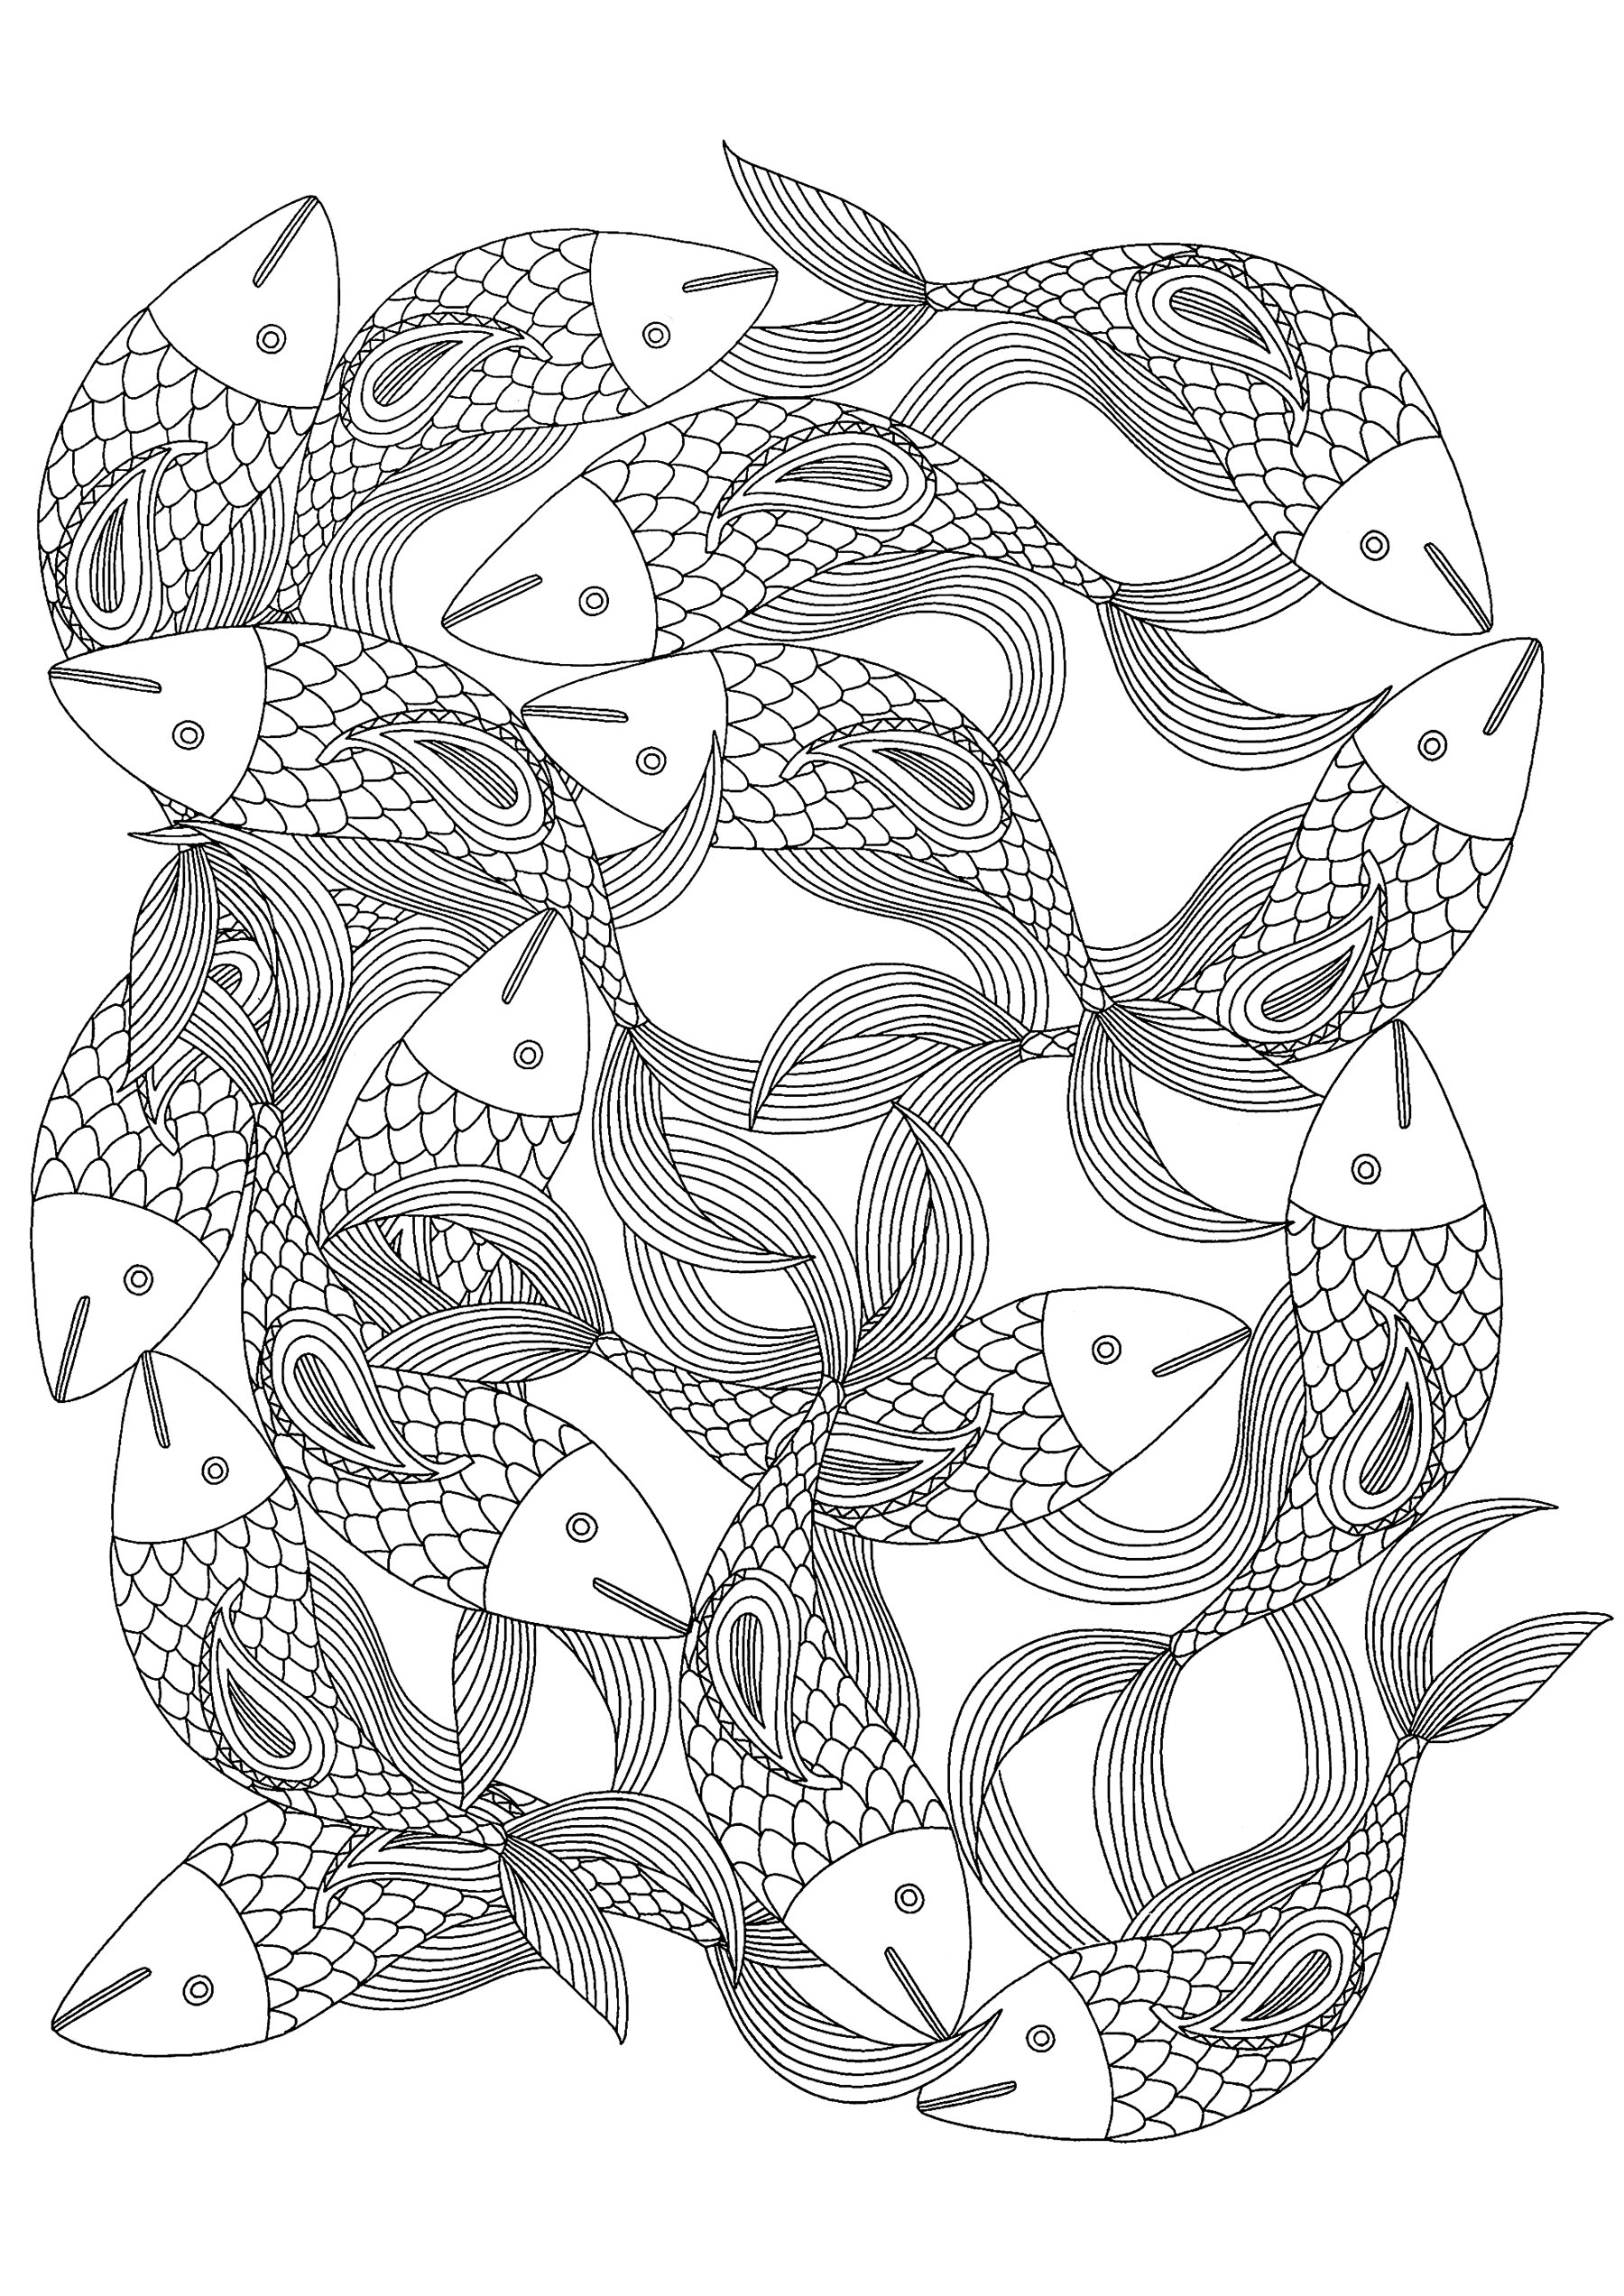 Pretty intertwined fishes to color